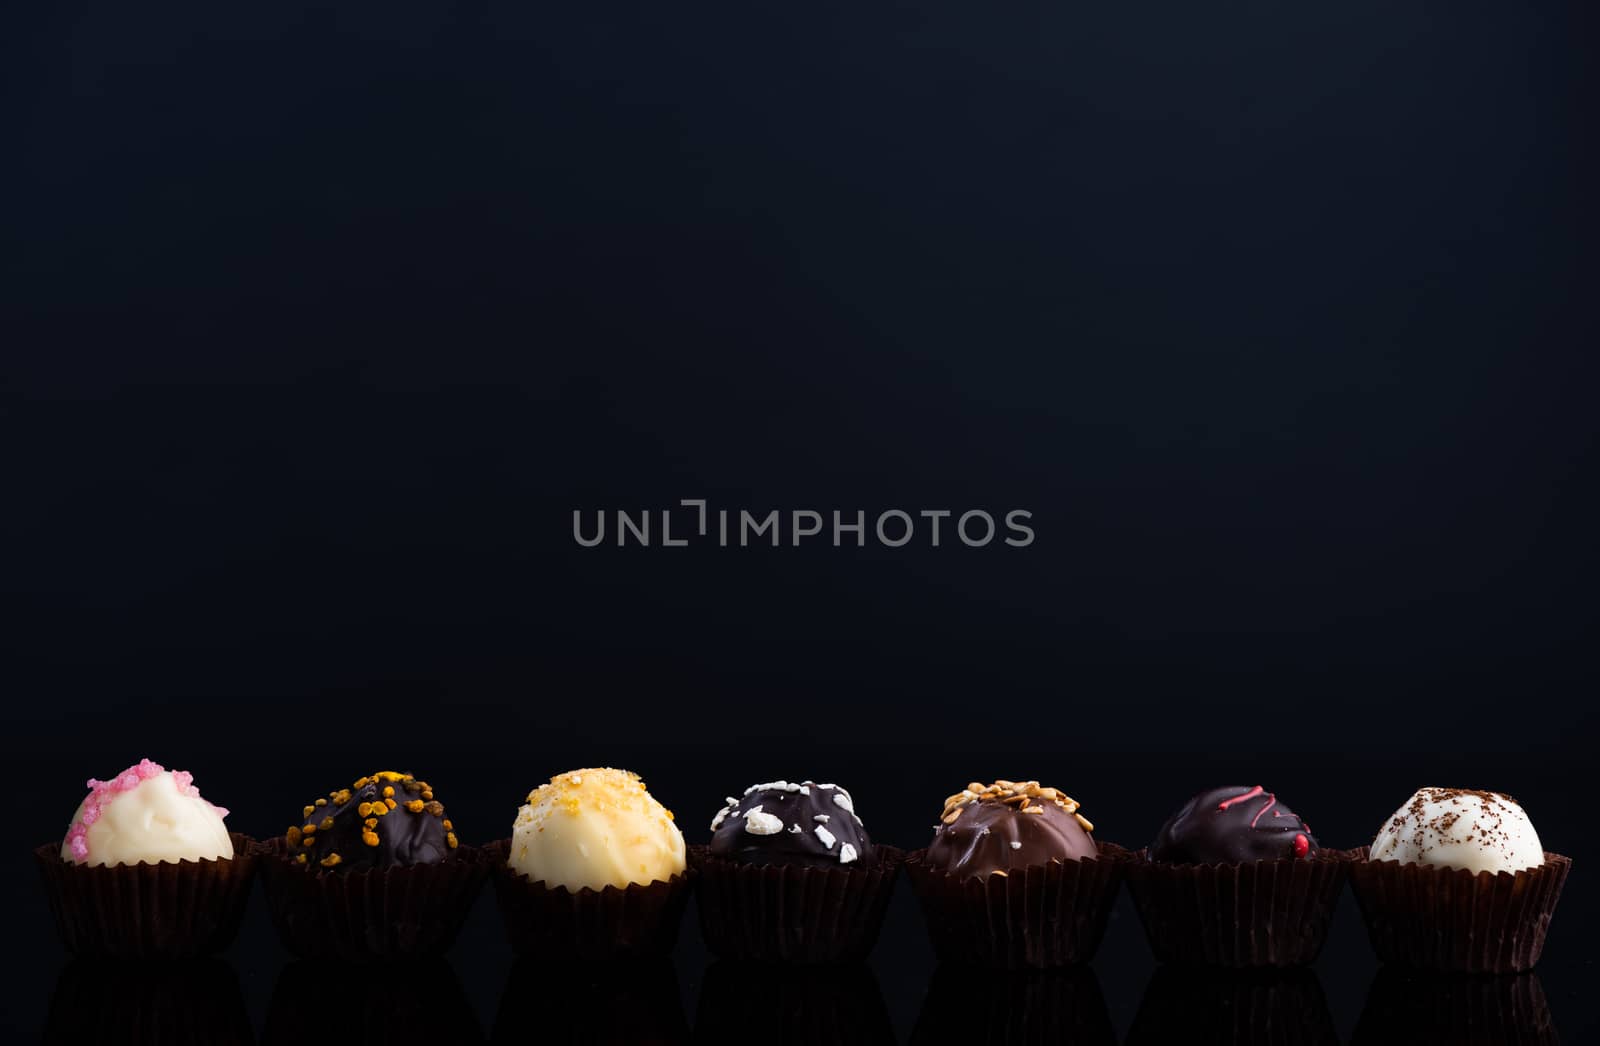 Chocolate Pralines on Dark Background. Copy Space for Text. Close Up Detail View.